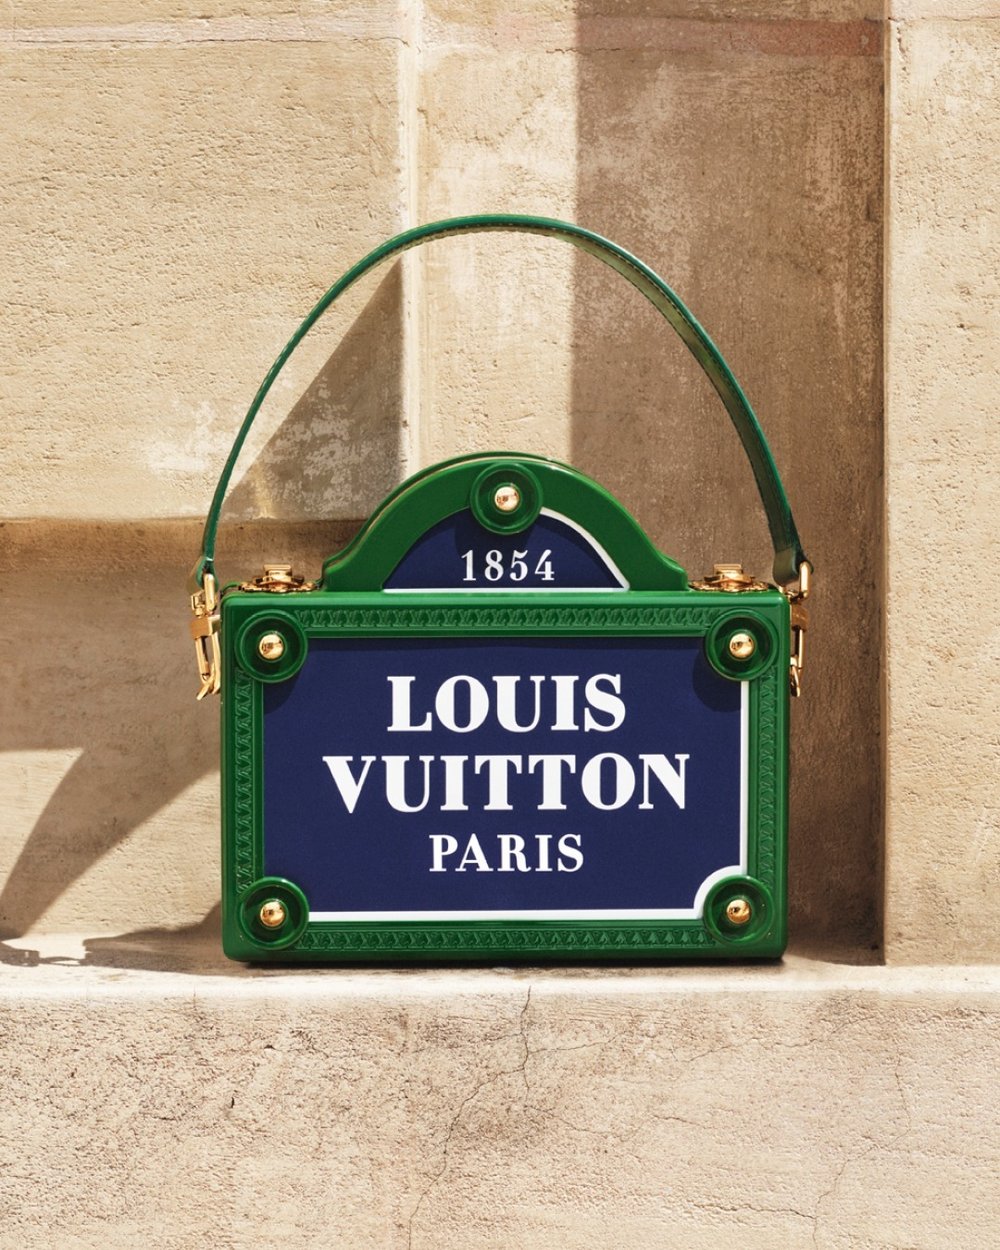 Louis Vuitton Summer 2022 Stardust Collection Honors Night Skies